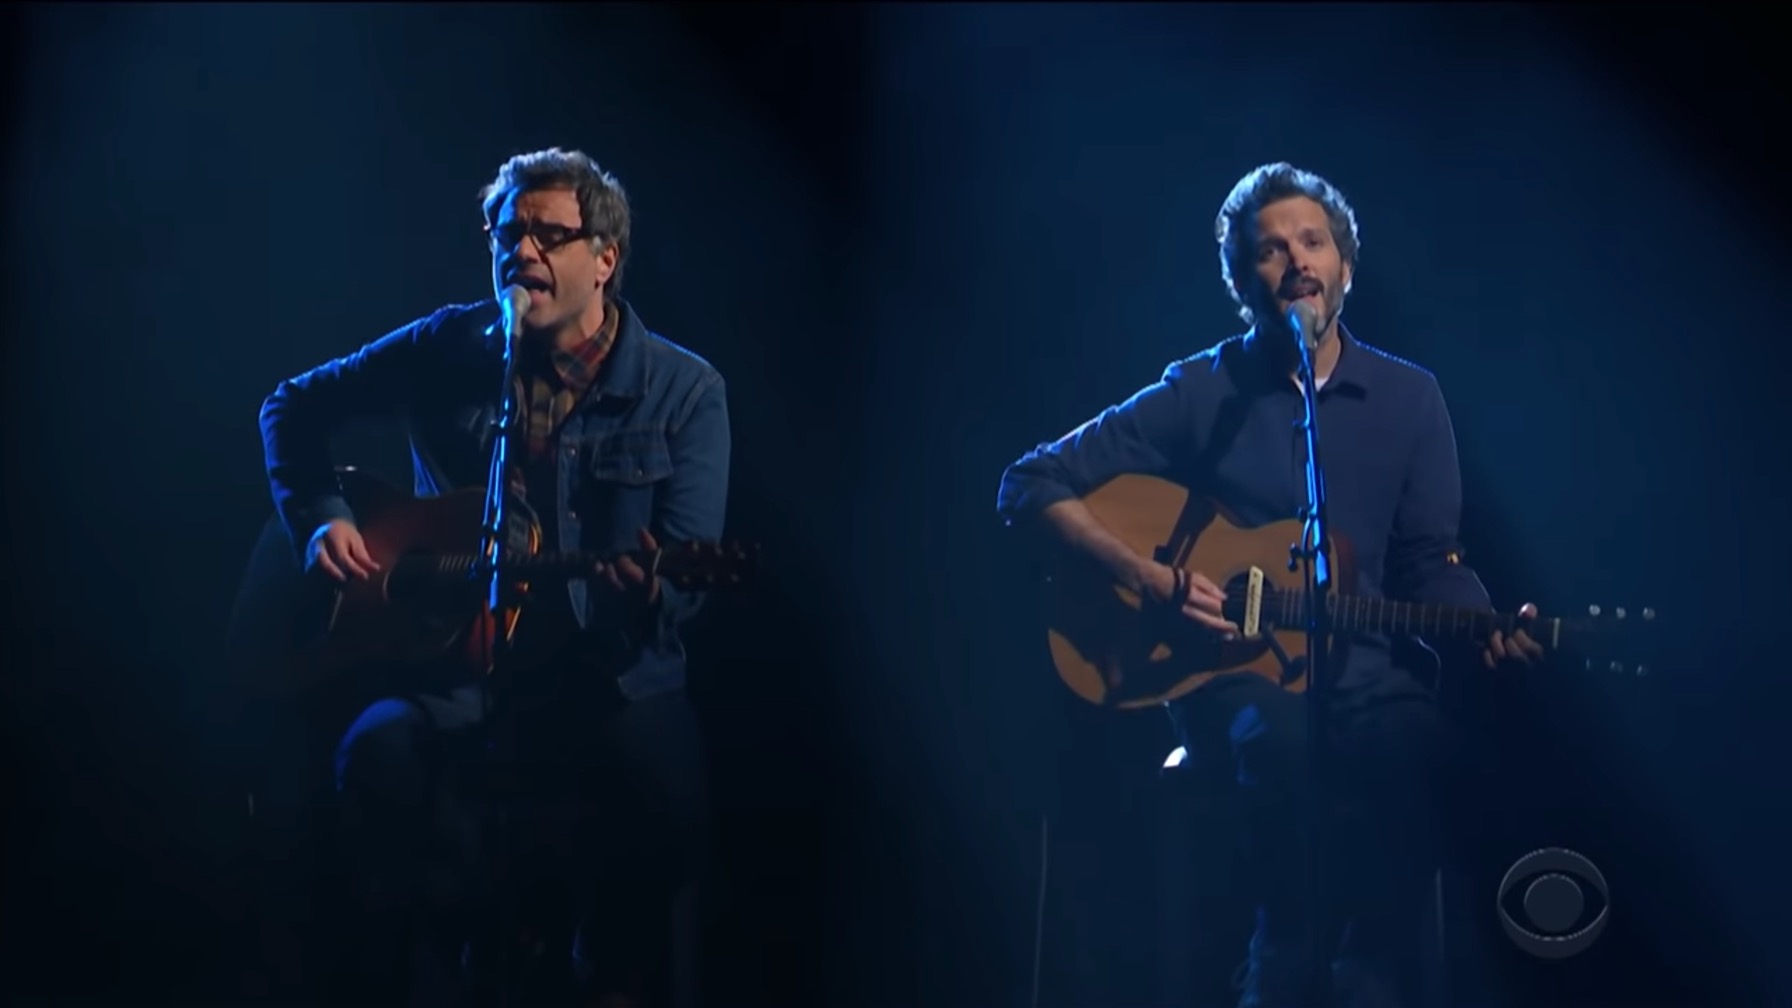 Flight of the Conchords' New Song 'Father & Son' Puts Fun in Dysfunctional [VIDEO]